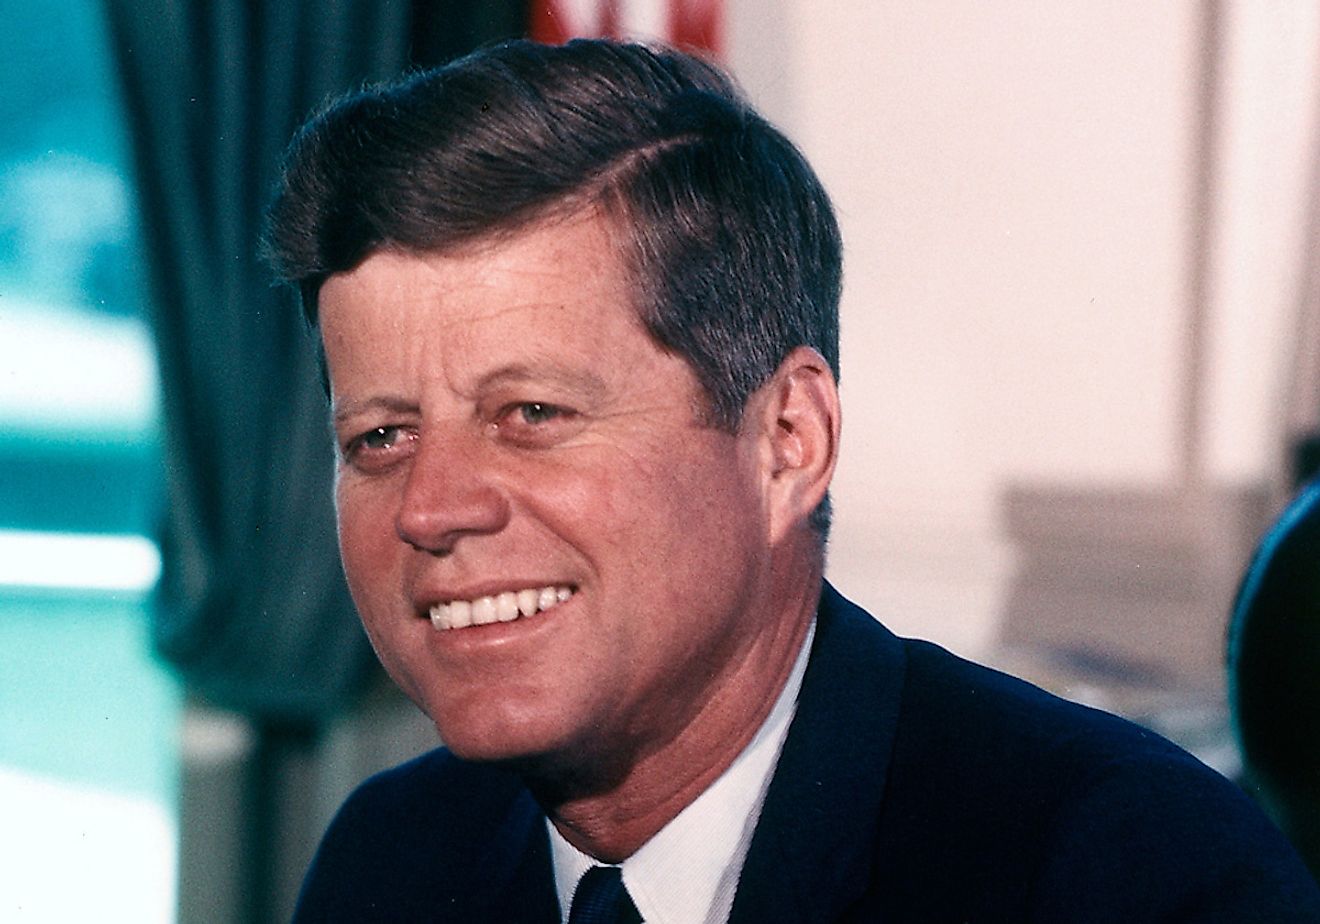 President John F. Kennedy in the Oval Office on July 11th, 1963. Image credit: U.S. Embassy New Delhi/Flickr.com